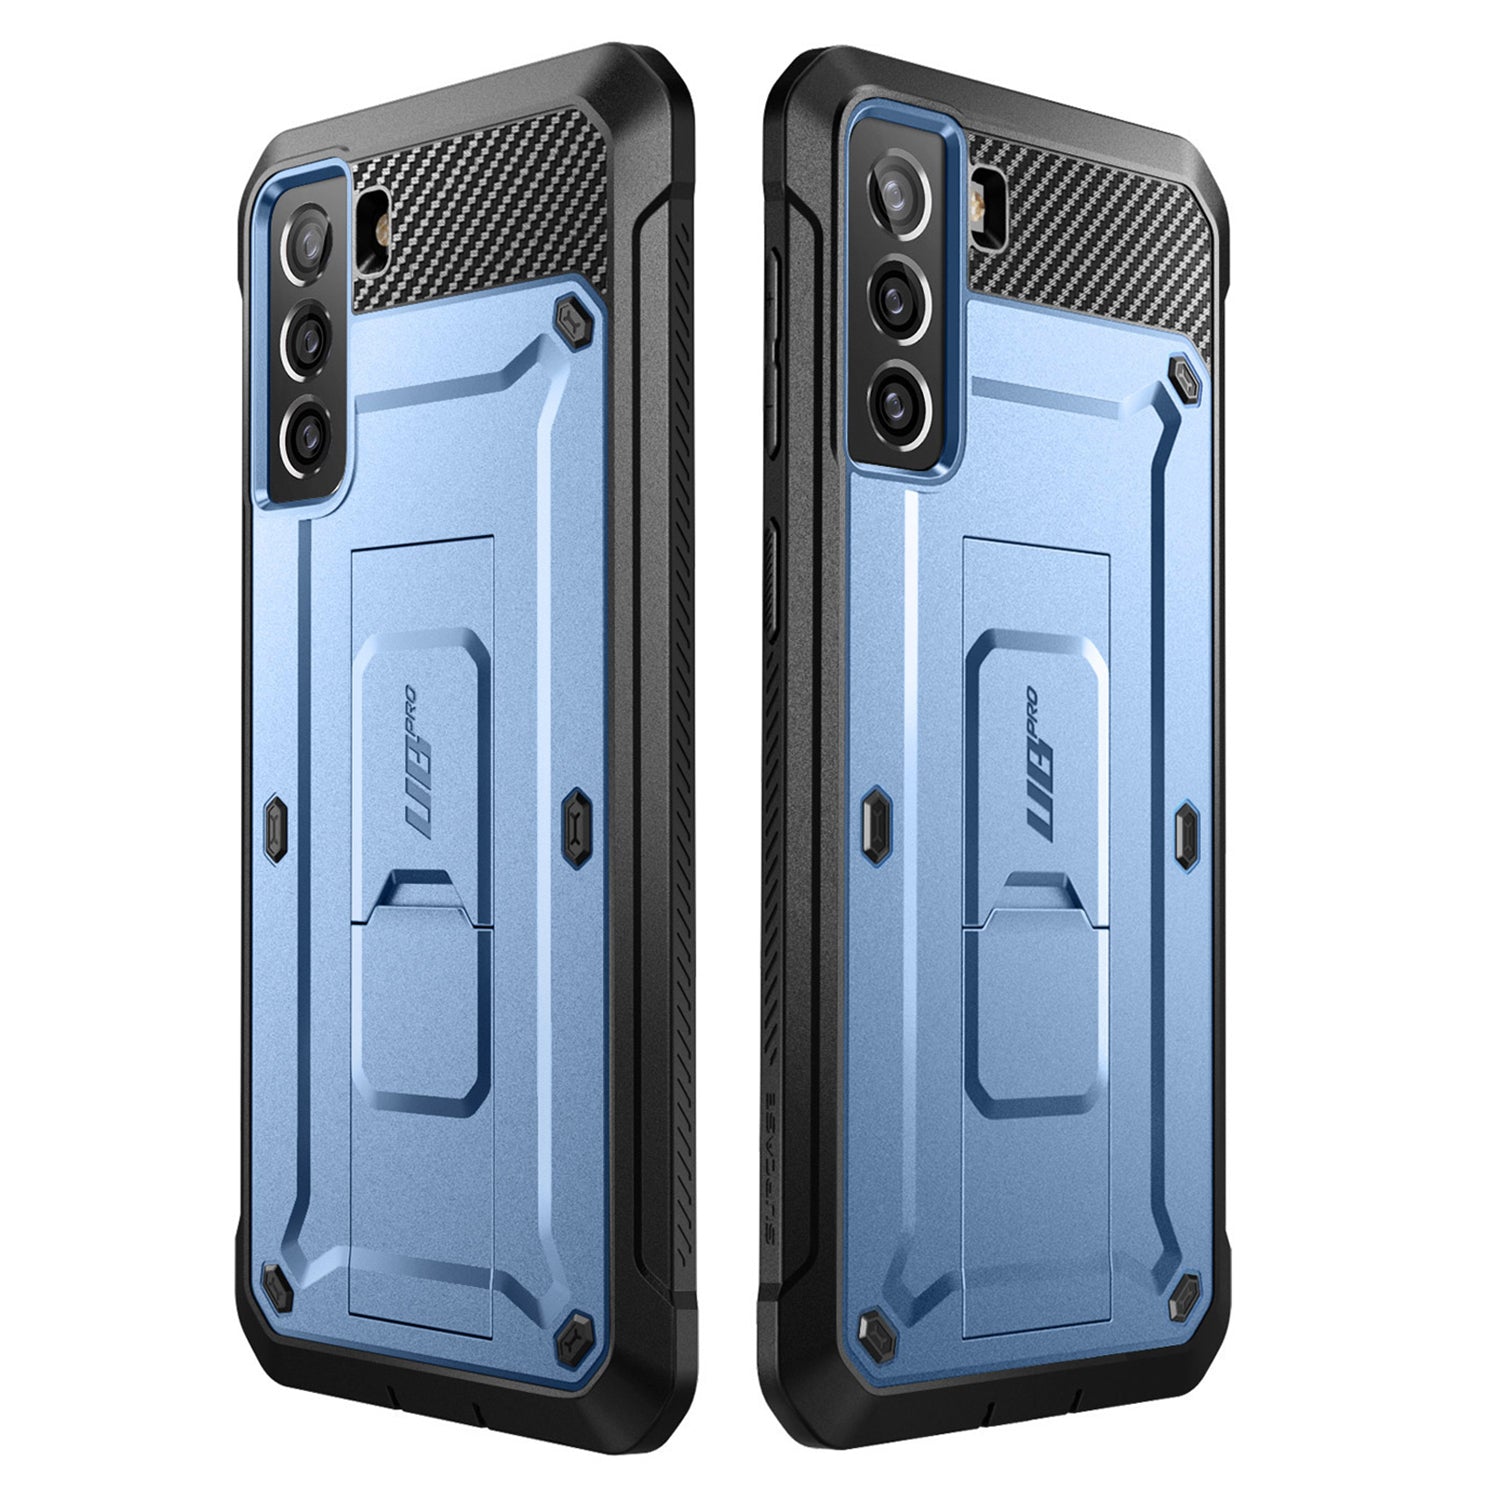 Supcase Unicorn Beetle Pro Series Full-Body Rugged Holster Case for Samsung Galaxy S21 FE(With built-in Screen Protector) Default Supcase 